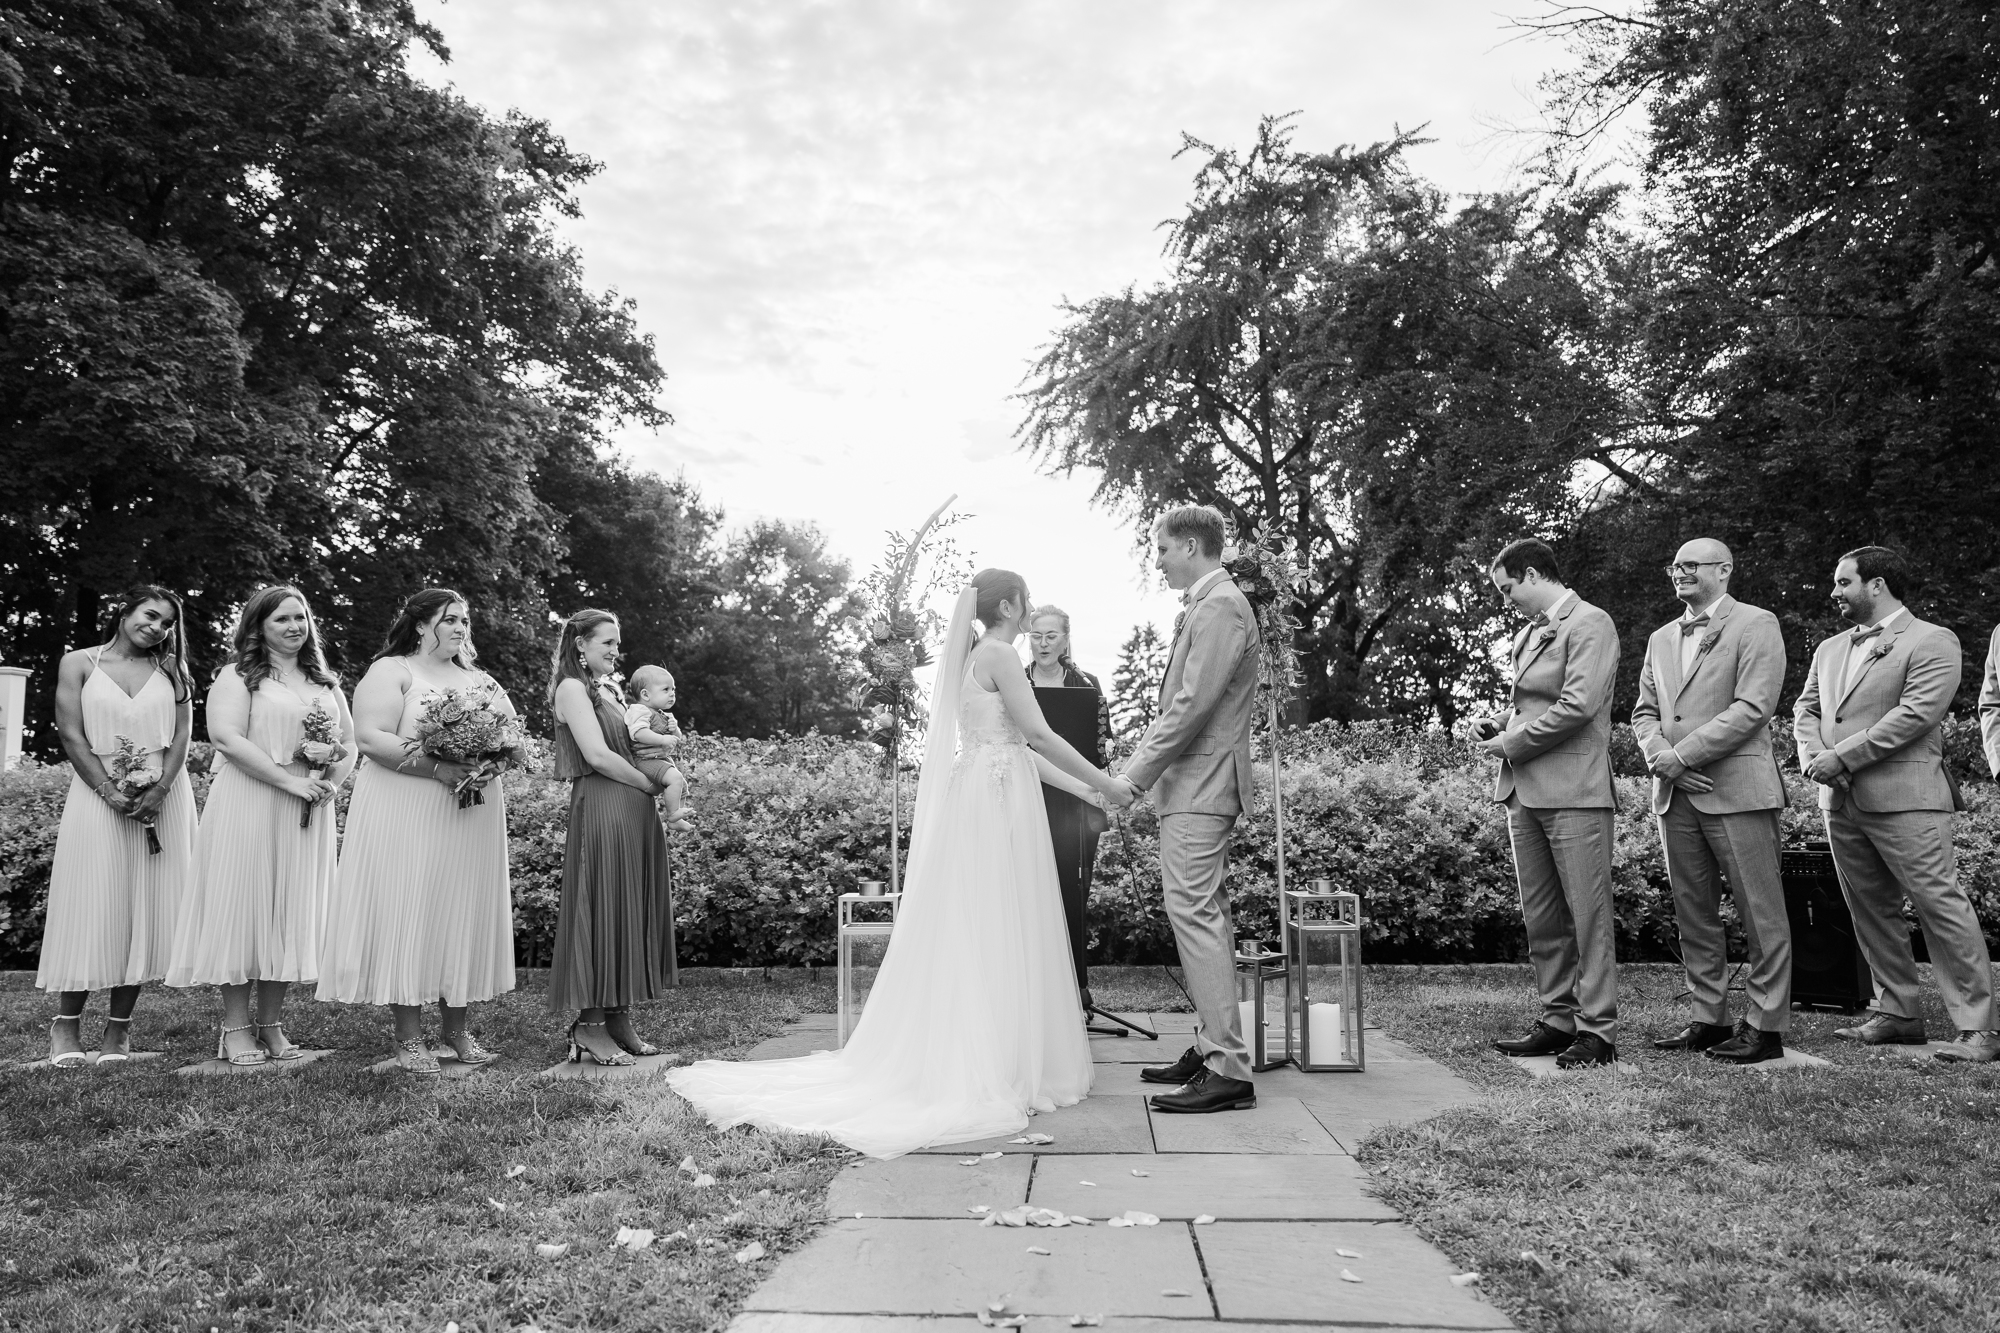 Perfect Wedding at Briarcliff Manor in Summertime